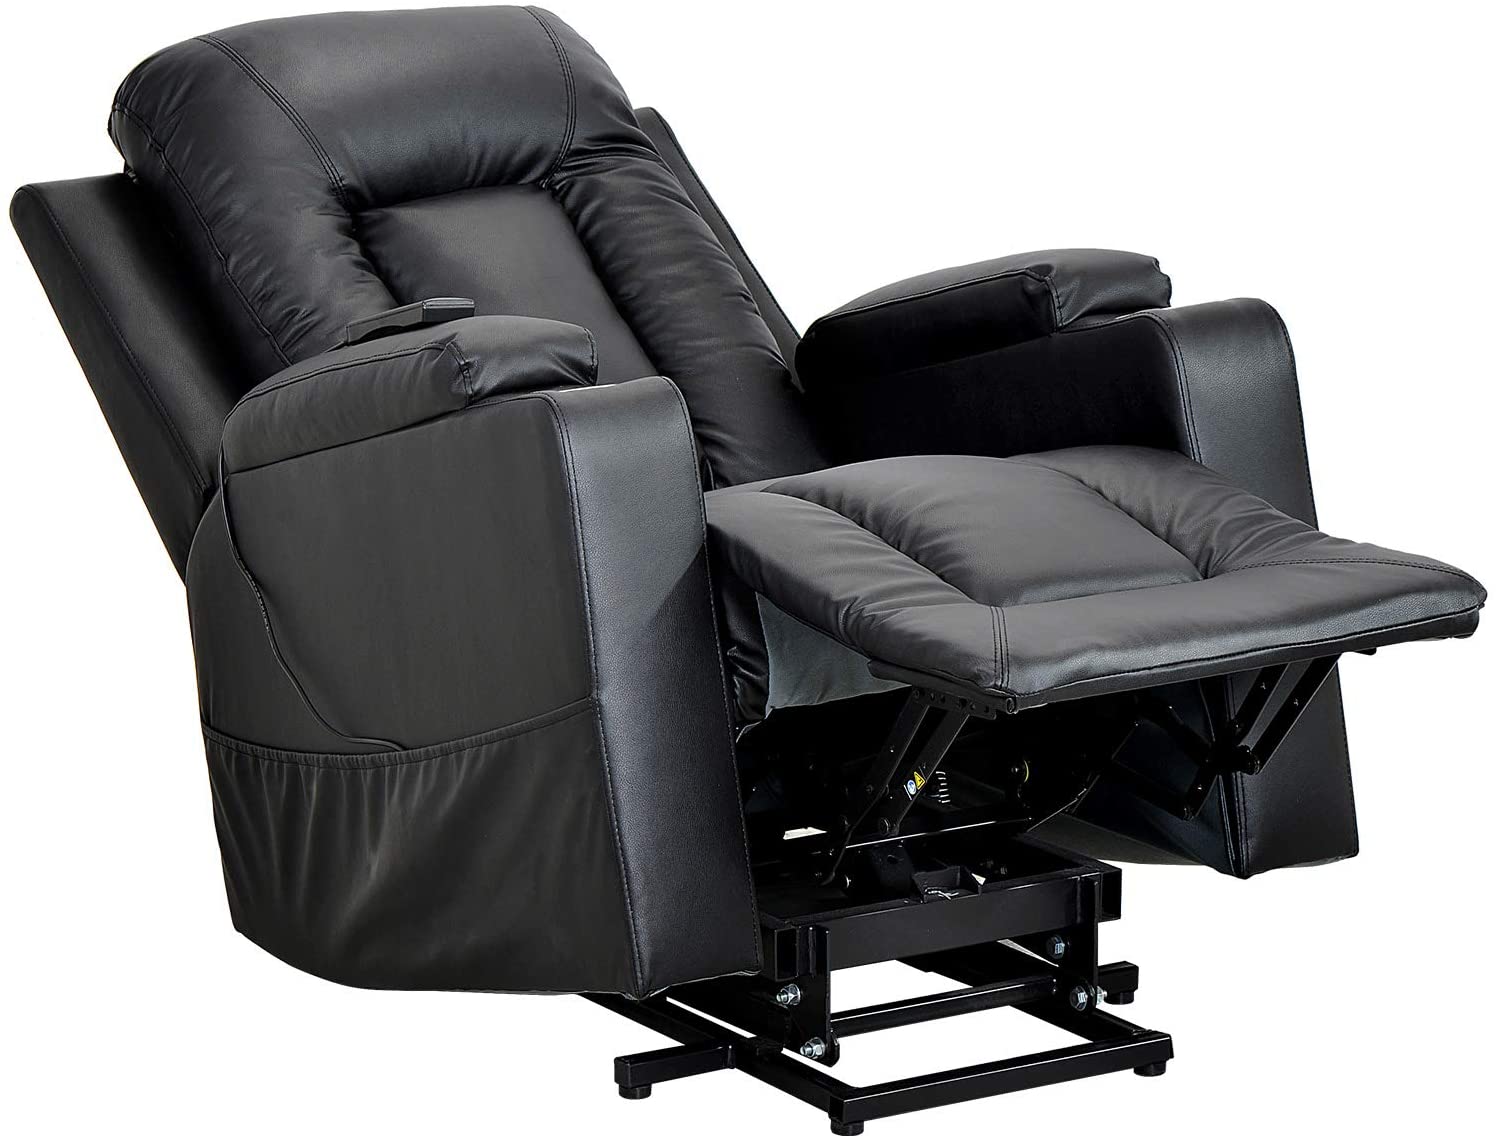 Living Room Recliner Armchair with Cup Holders